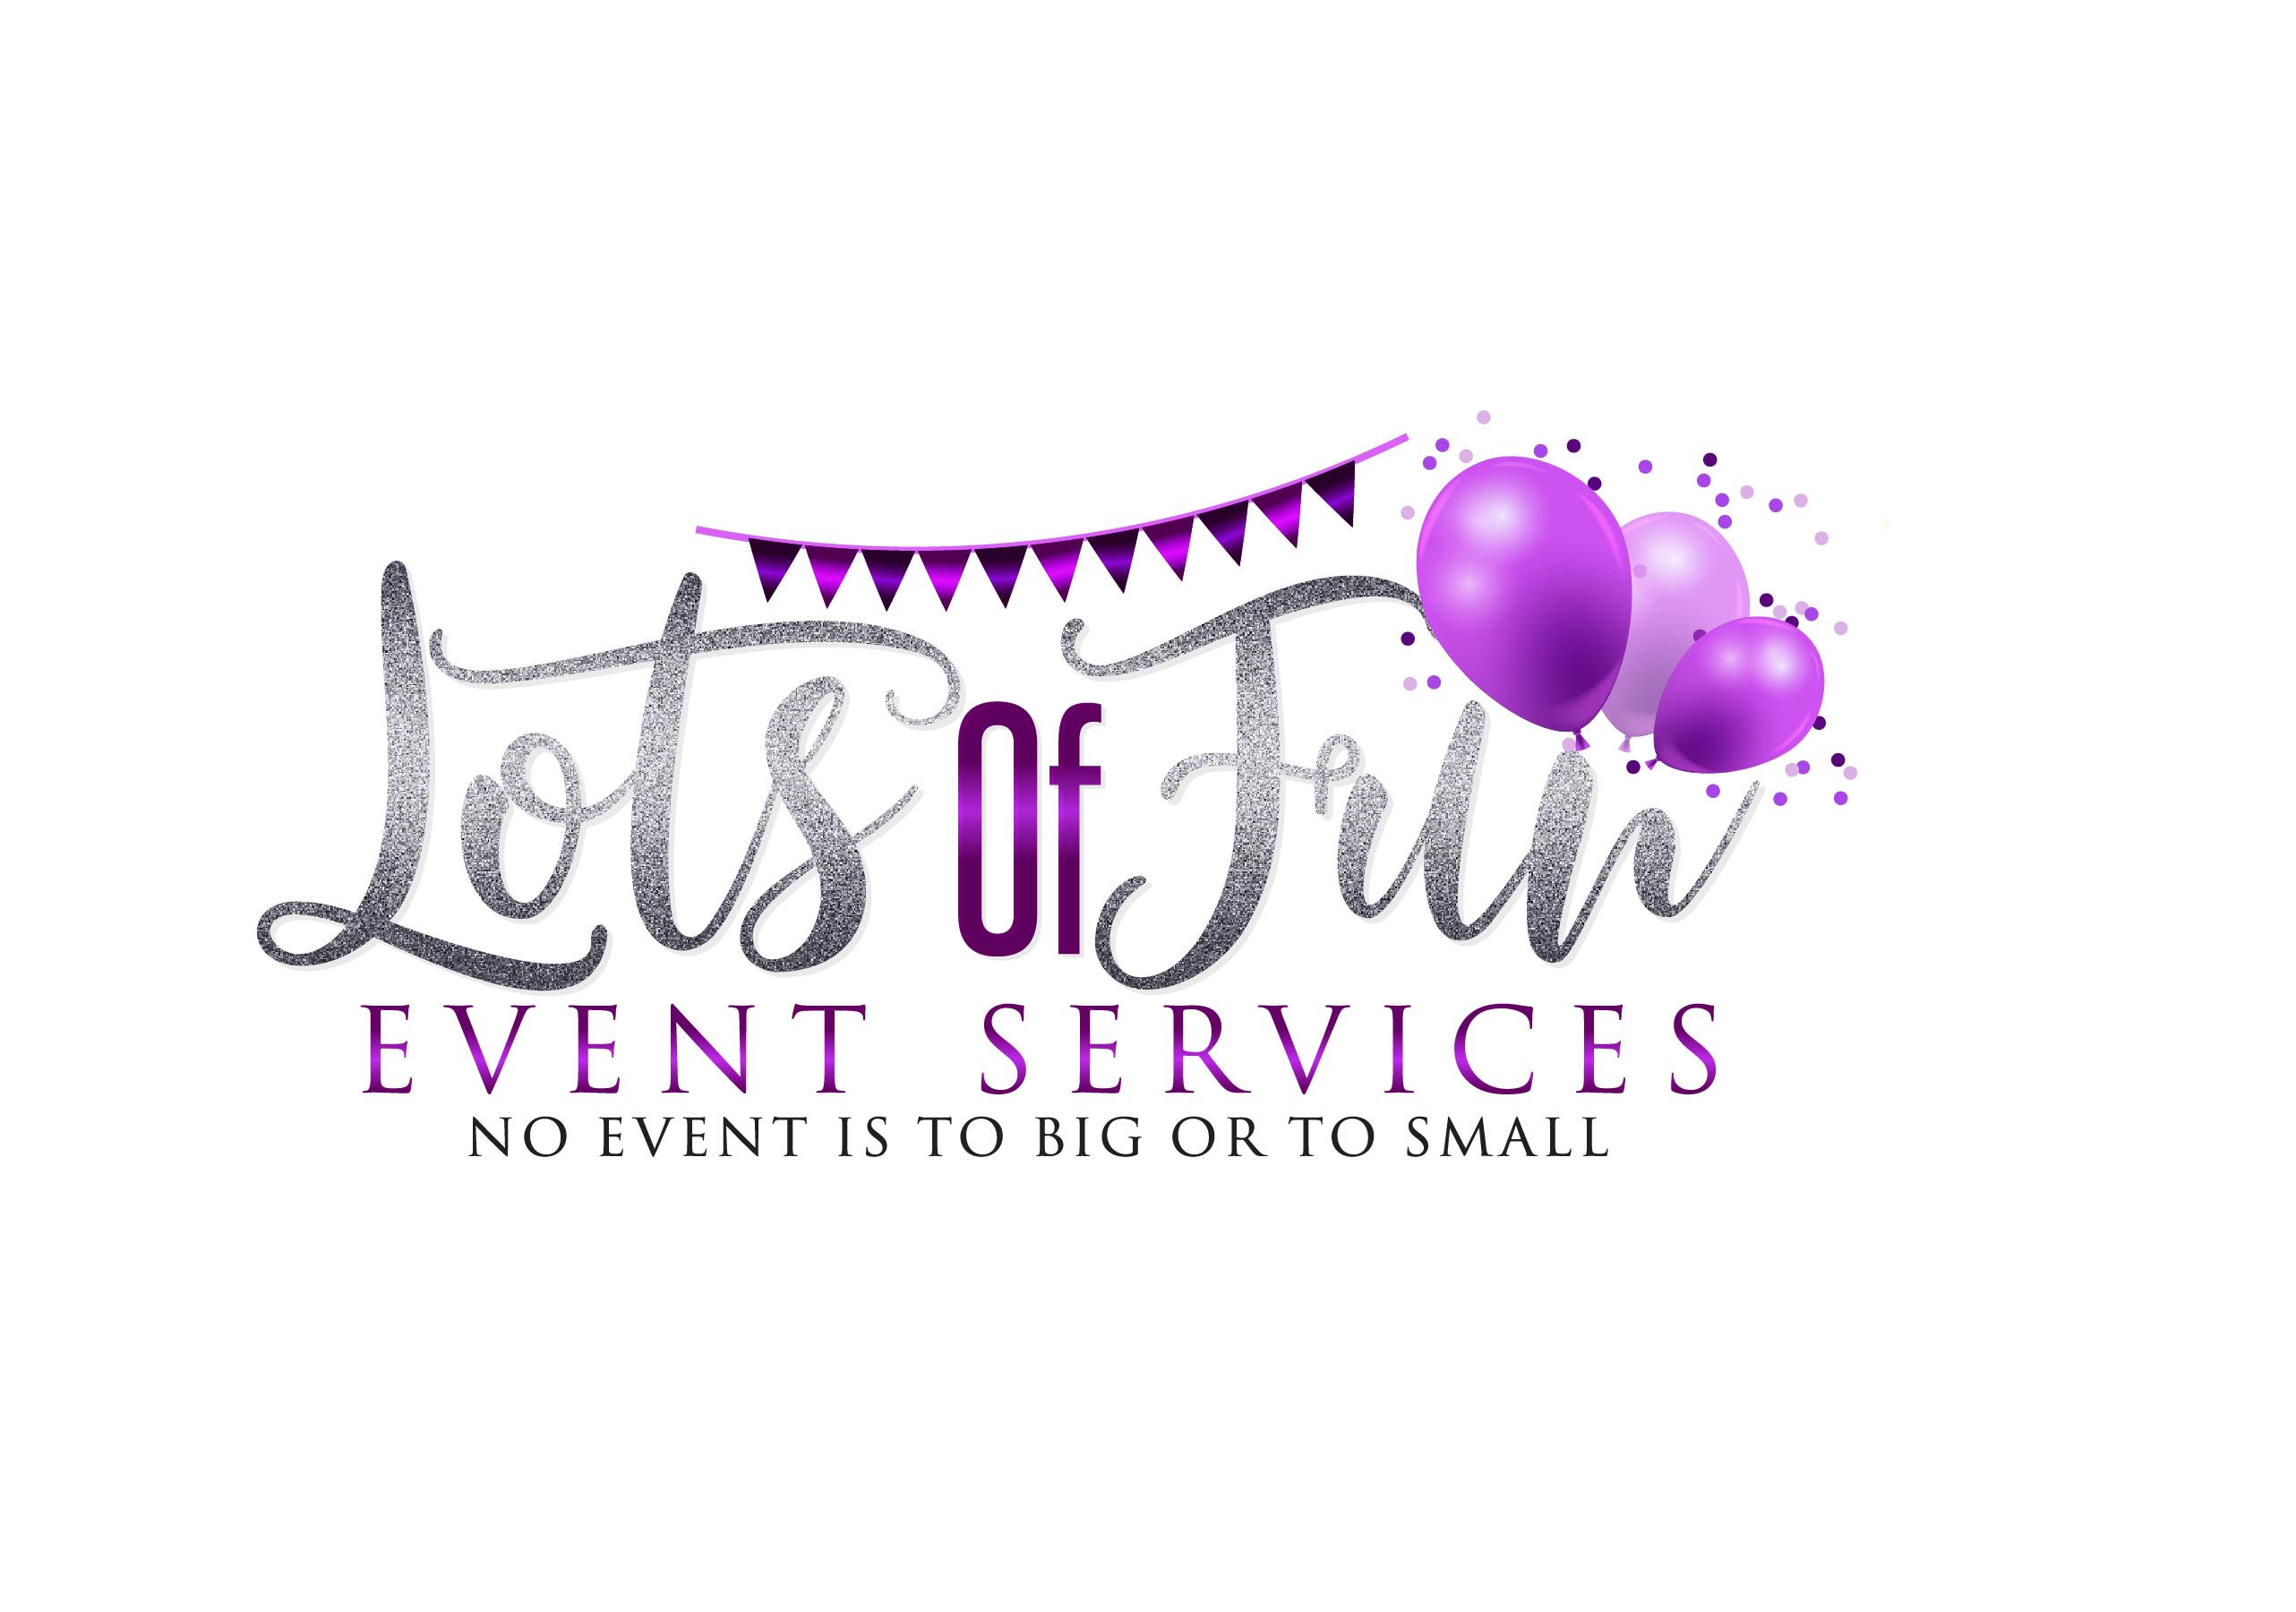 Lots Of Fun Event Services